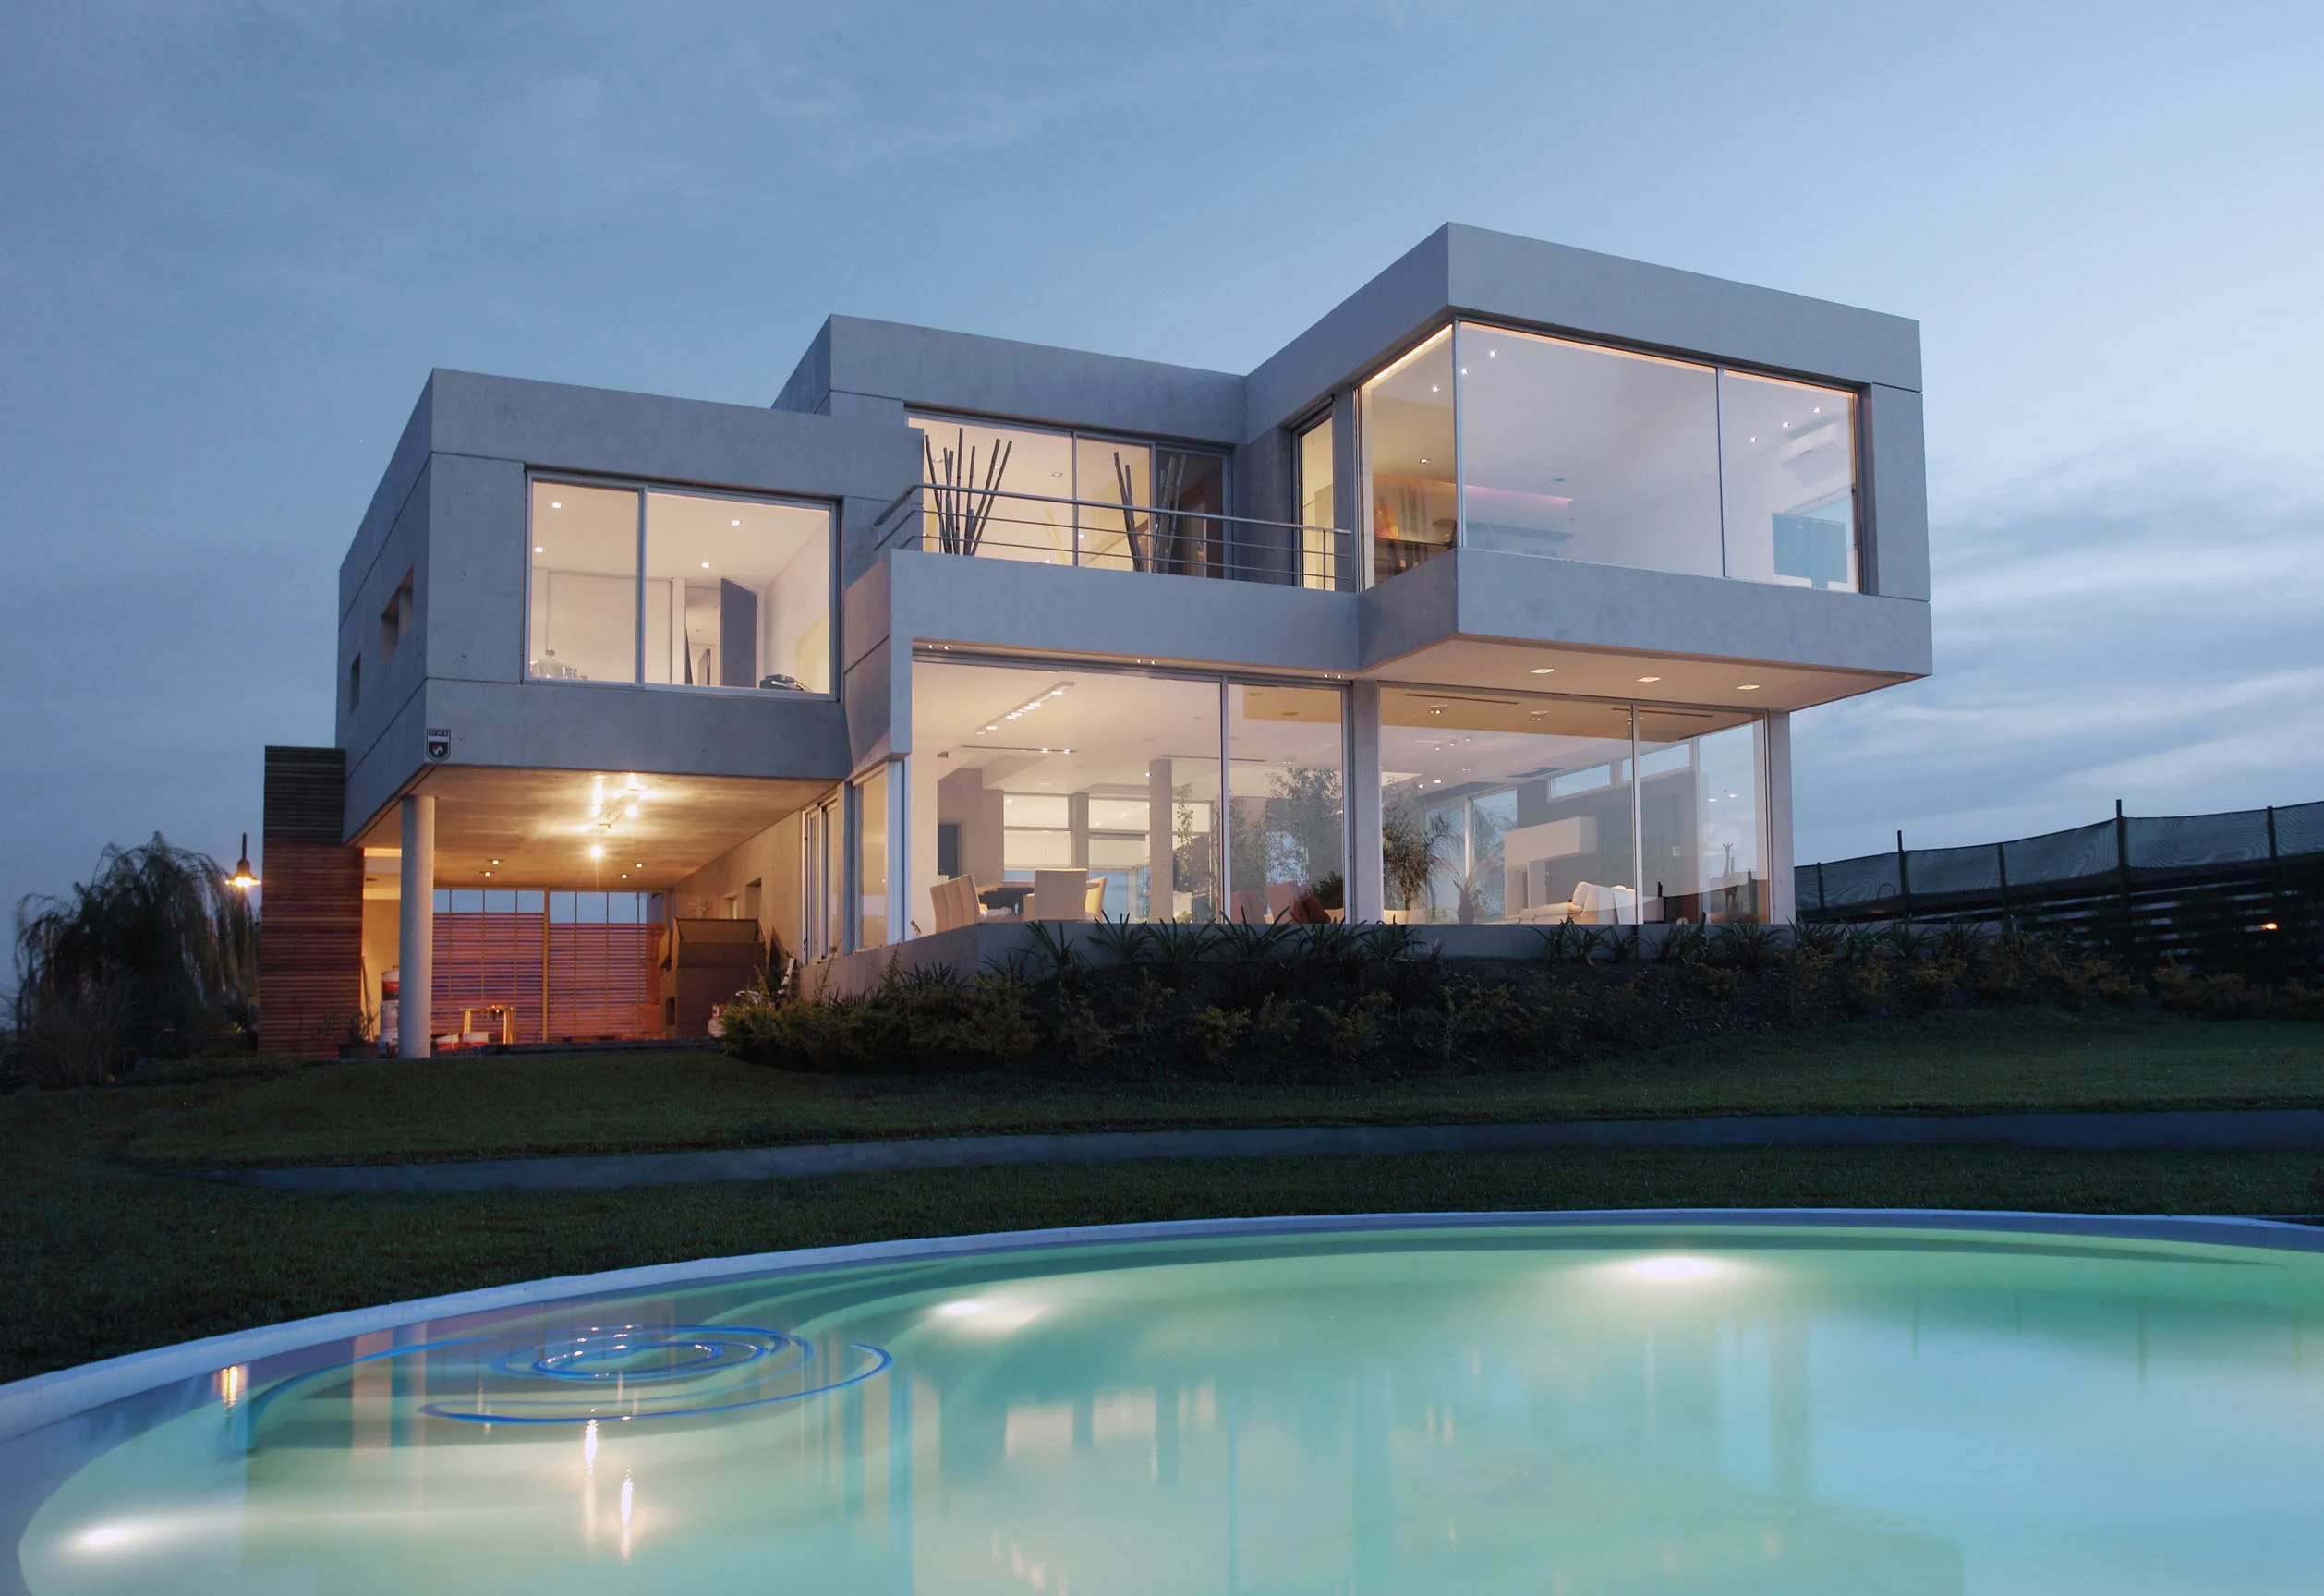 cube-shaped structures, with large windows, and white panelling, forming a house, postmodern architecture, near a blue swimming pool 